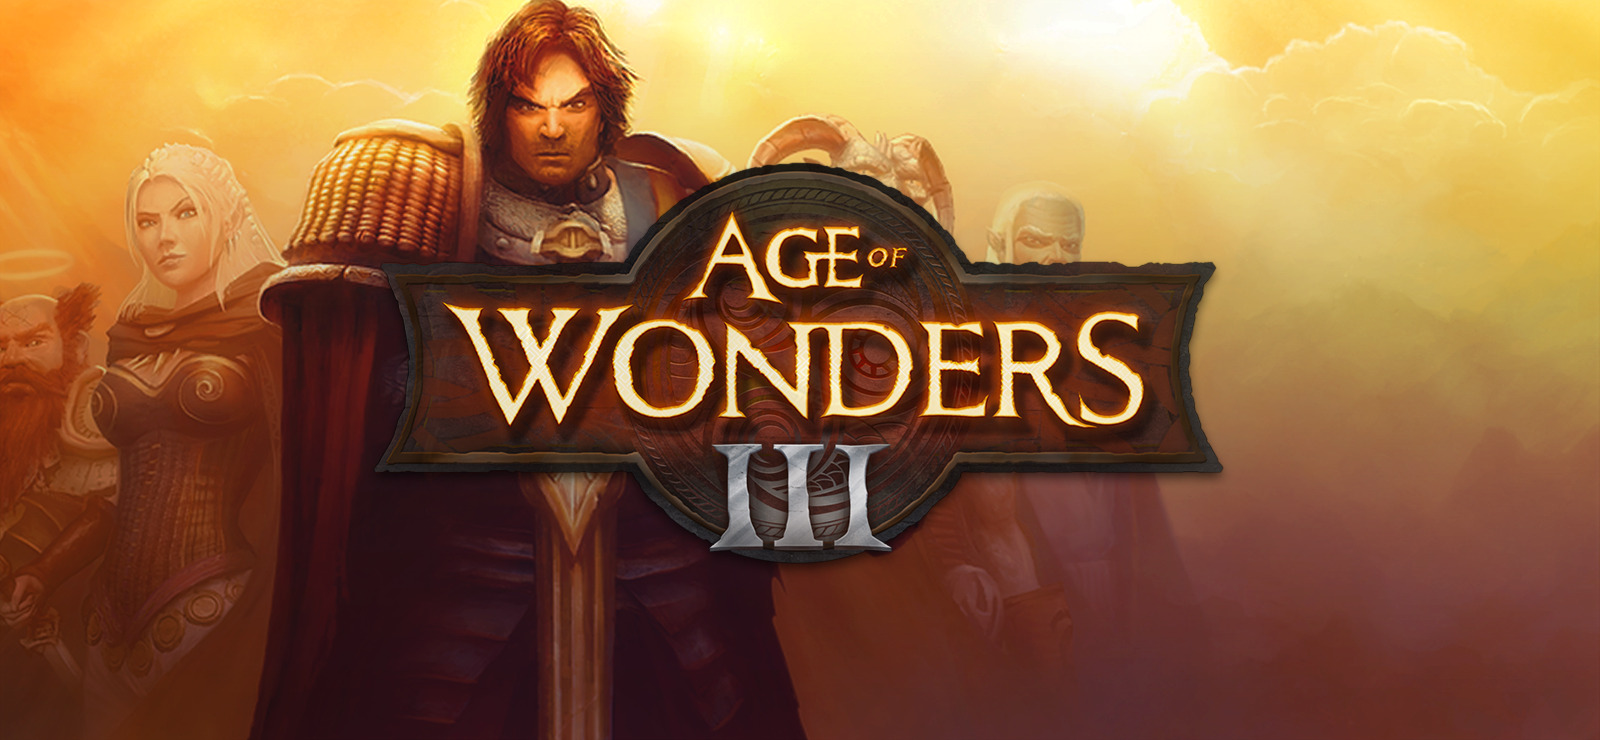 age of wonders 3 adding units to army